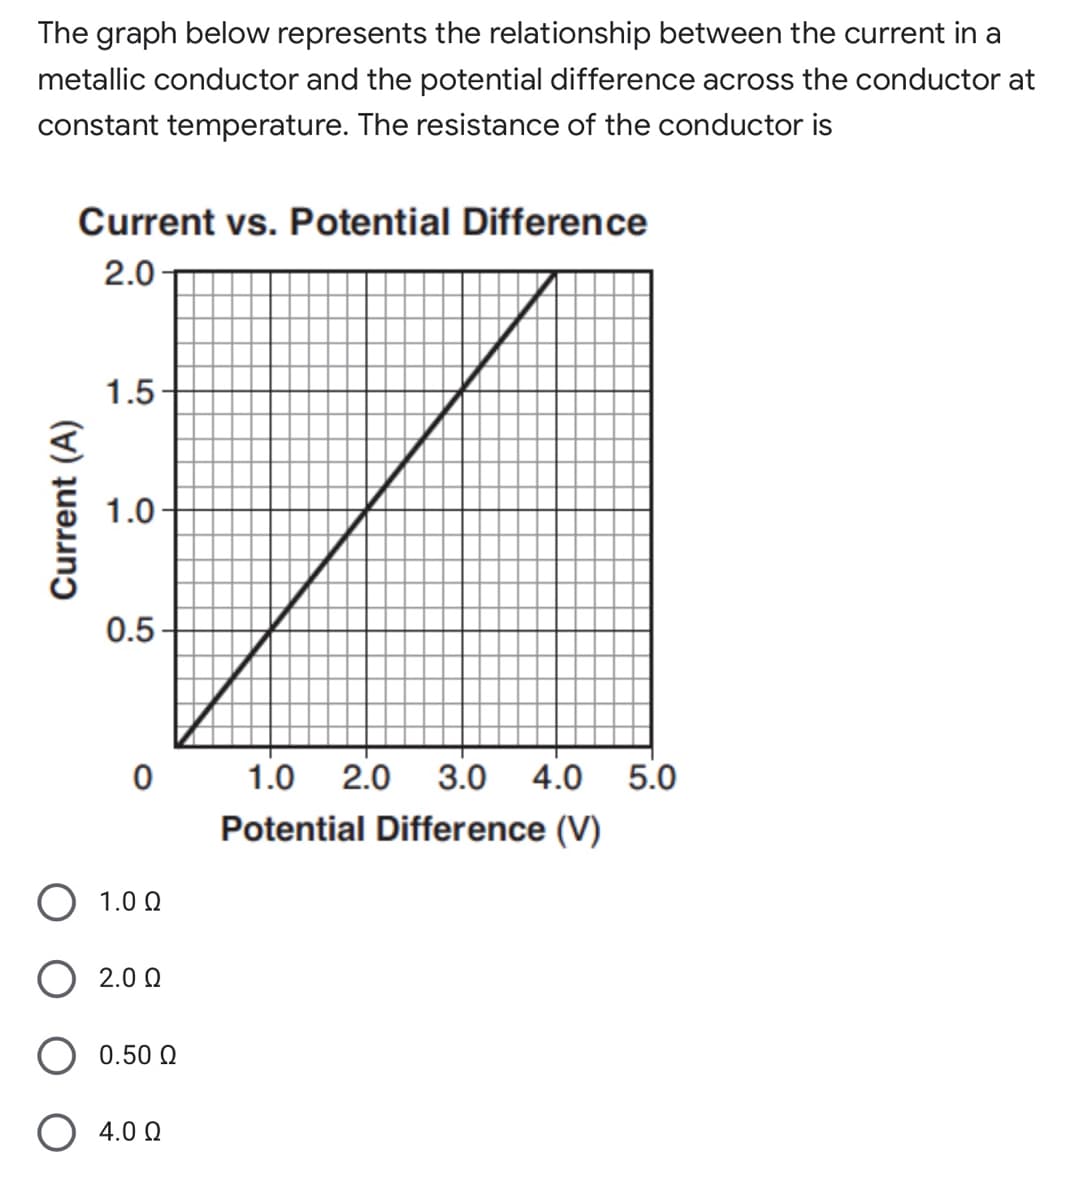 The graph below represents the relationship between the current in a
metallic conductor and the potential difference across the conductor at
constant temperature. The resistance of the conductor is
Current vs. Potential Difference
2.0-
1.5
1.0
0.5
0 1.0
2.0 3.0
4.0 5.0
Potential Difference (V)
1.0 Q
O 2.0 0
0.50 Q
O 4.0 0
Current (A)
